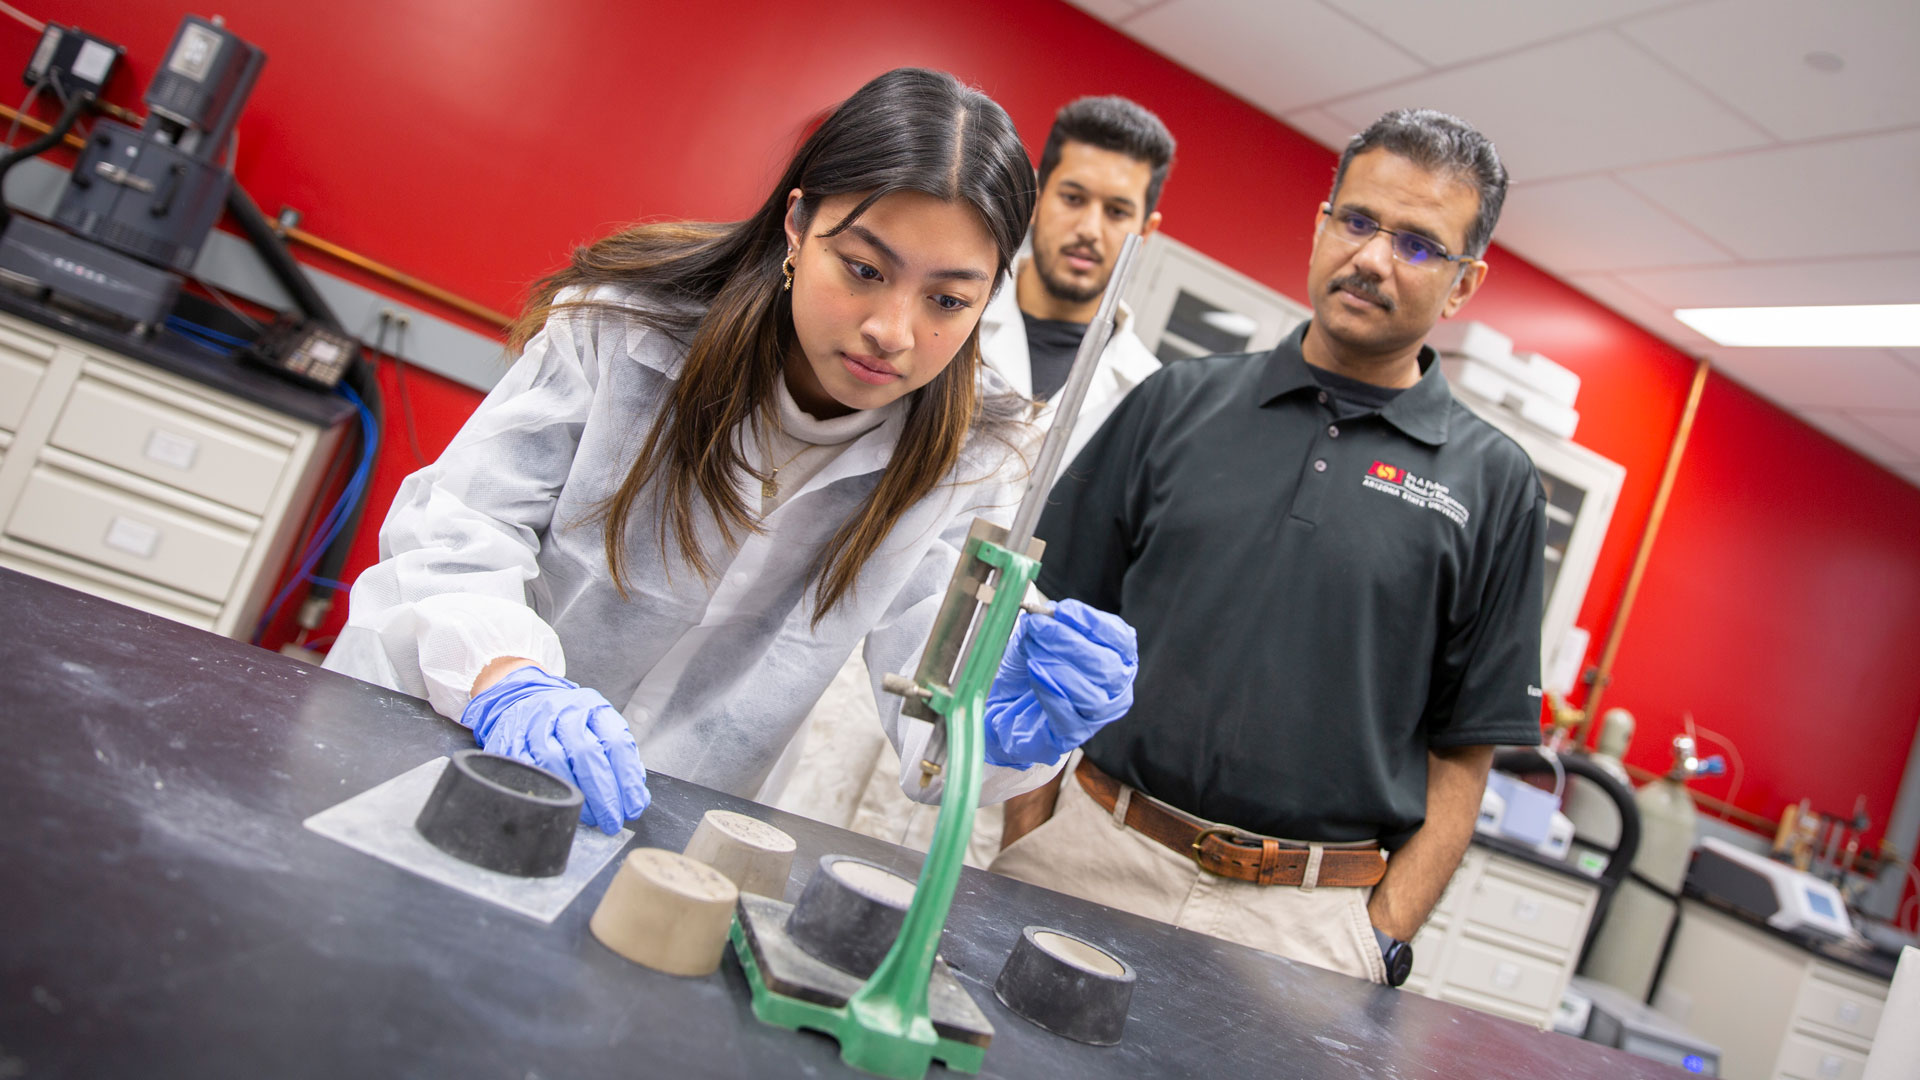 ASU civil engineering student Lana Banzon works with Professor Narayanan Neithalath and a graduate student in the lab as part of a FURI research project.